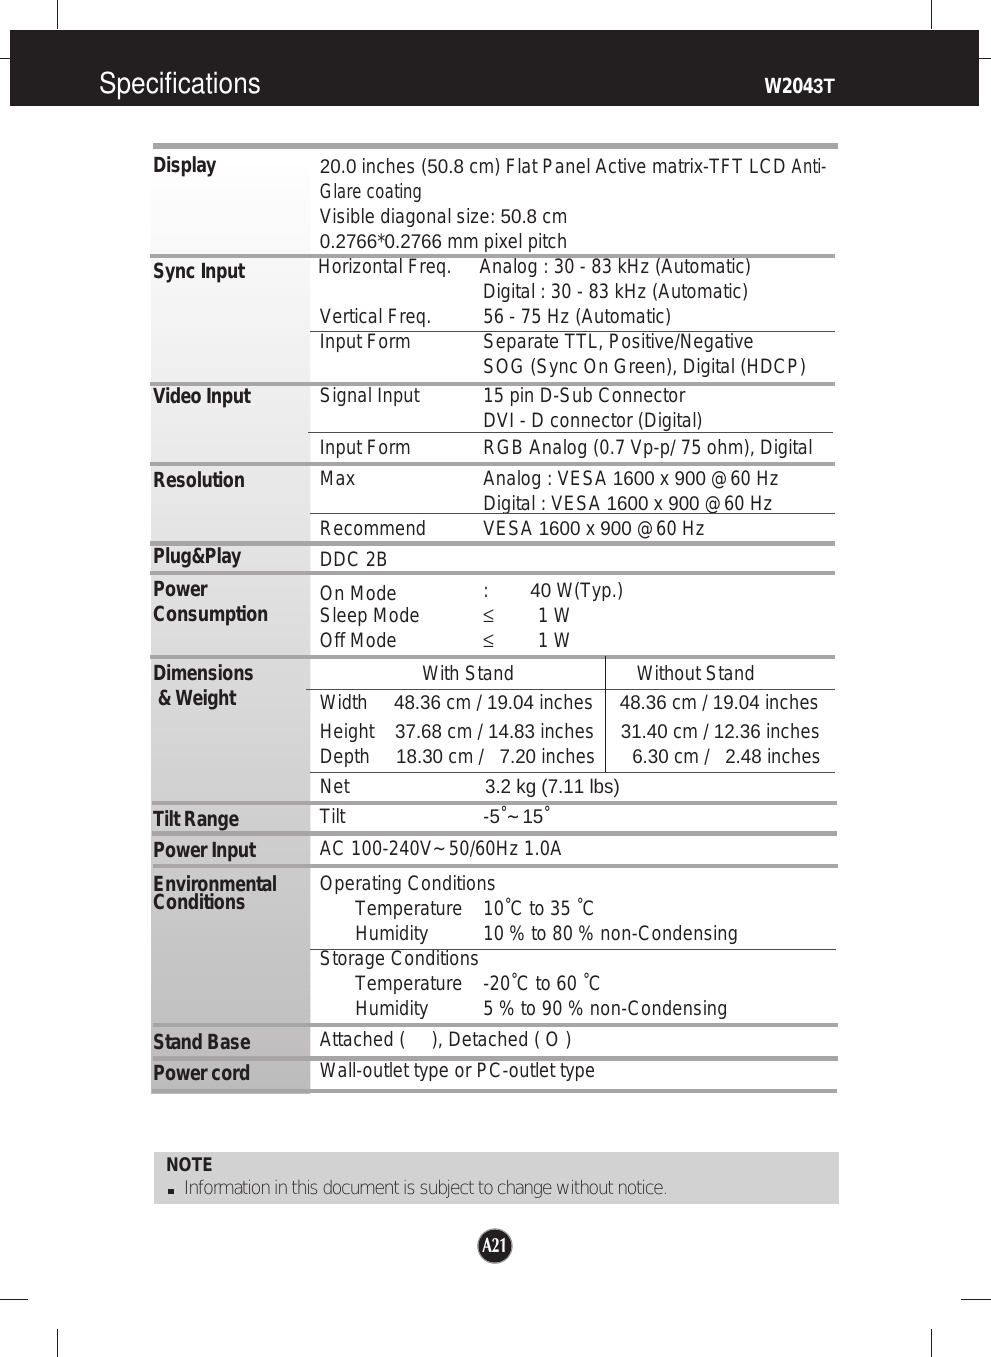 Specifications                                                                     W2043TNOTEInformation in this document is subject to change without notice.DisplaySync InputVideo InputResolutionPlug&amp;PlayPowerConsumptionDimensions&amp; WeightTilt RangePower InputEnvironmentalConditionsStand Base Power cord 20.0 inches (50.8 cm) Flat Panel Active matrix-TFT LCDAnti-Glare coatingVisible diagonal size: 50.8 cm0.2766*0.2766 mm pixel pitchHorizontal Freq. Analog : 30 - 83 kHz (Automatic)Digital : 30 - 83 kHz (Automatic)Vertical Freq. 56 - 75 Hz (Automatic)Input Form Separate TTL, Positive/NegativeSOG (Sync On Green), Digital (HDCP)Signal Input 15 pin D-Sub ConnectorDVI - D connector (Digital)Input Form RGB Analog (0.7 Vp-p/ 75 ohm), DigitalMax Analog : VESA 1600 x 900 @60 HzDigital : VESA 1600 x 900 @60 HzRecommend VESA 1600 x 900 @60 HzDDC 2B   On Mode :        40 W(Typ.)Sleep Mode ≤1 WOff Mode ≤1 WWith Stand Without StandWidth     48.36 cm / 19.04 inches     48.36 cm / 19.04 inchesHeight    37.68 cm / 14.83 inches     31.40 cm / 12.36 inches Depth     18.30 cm /   7.20 inches       6.30 cm /   2.48 inchesNet                          3.2 kg (7.11 lbs)Tilt -5˚~ 15˚AC 100-240V~ 50/60Hz 1.0A Operating ConditionsTemperature 10˚C to 35 ˚CHumidity 10 % to 80 % non-CondensingStorage ConditionsTemperature -20˚C to 60 ˚C Humidity 5 % to 90 % non-CondensingAttached (     ), Detached ( O )Wall-outlet type or PC-outlet typeA21